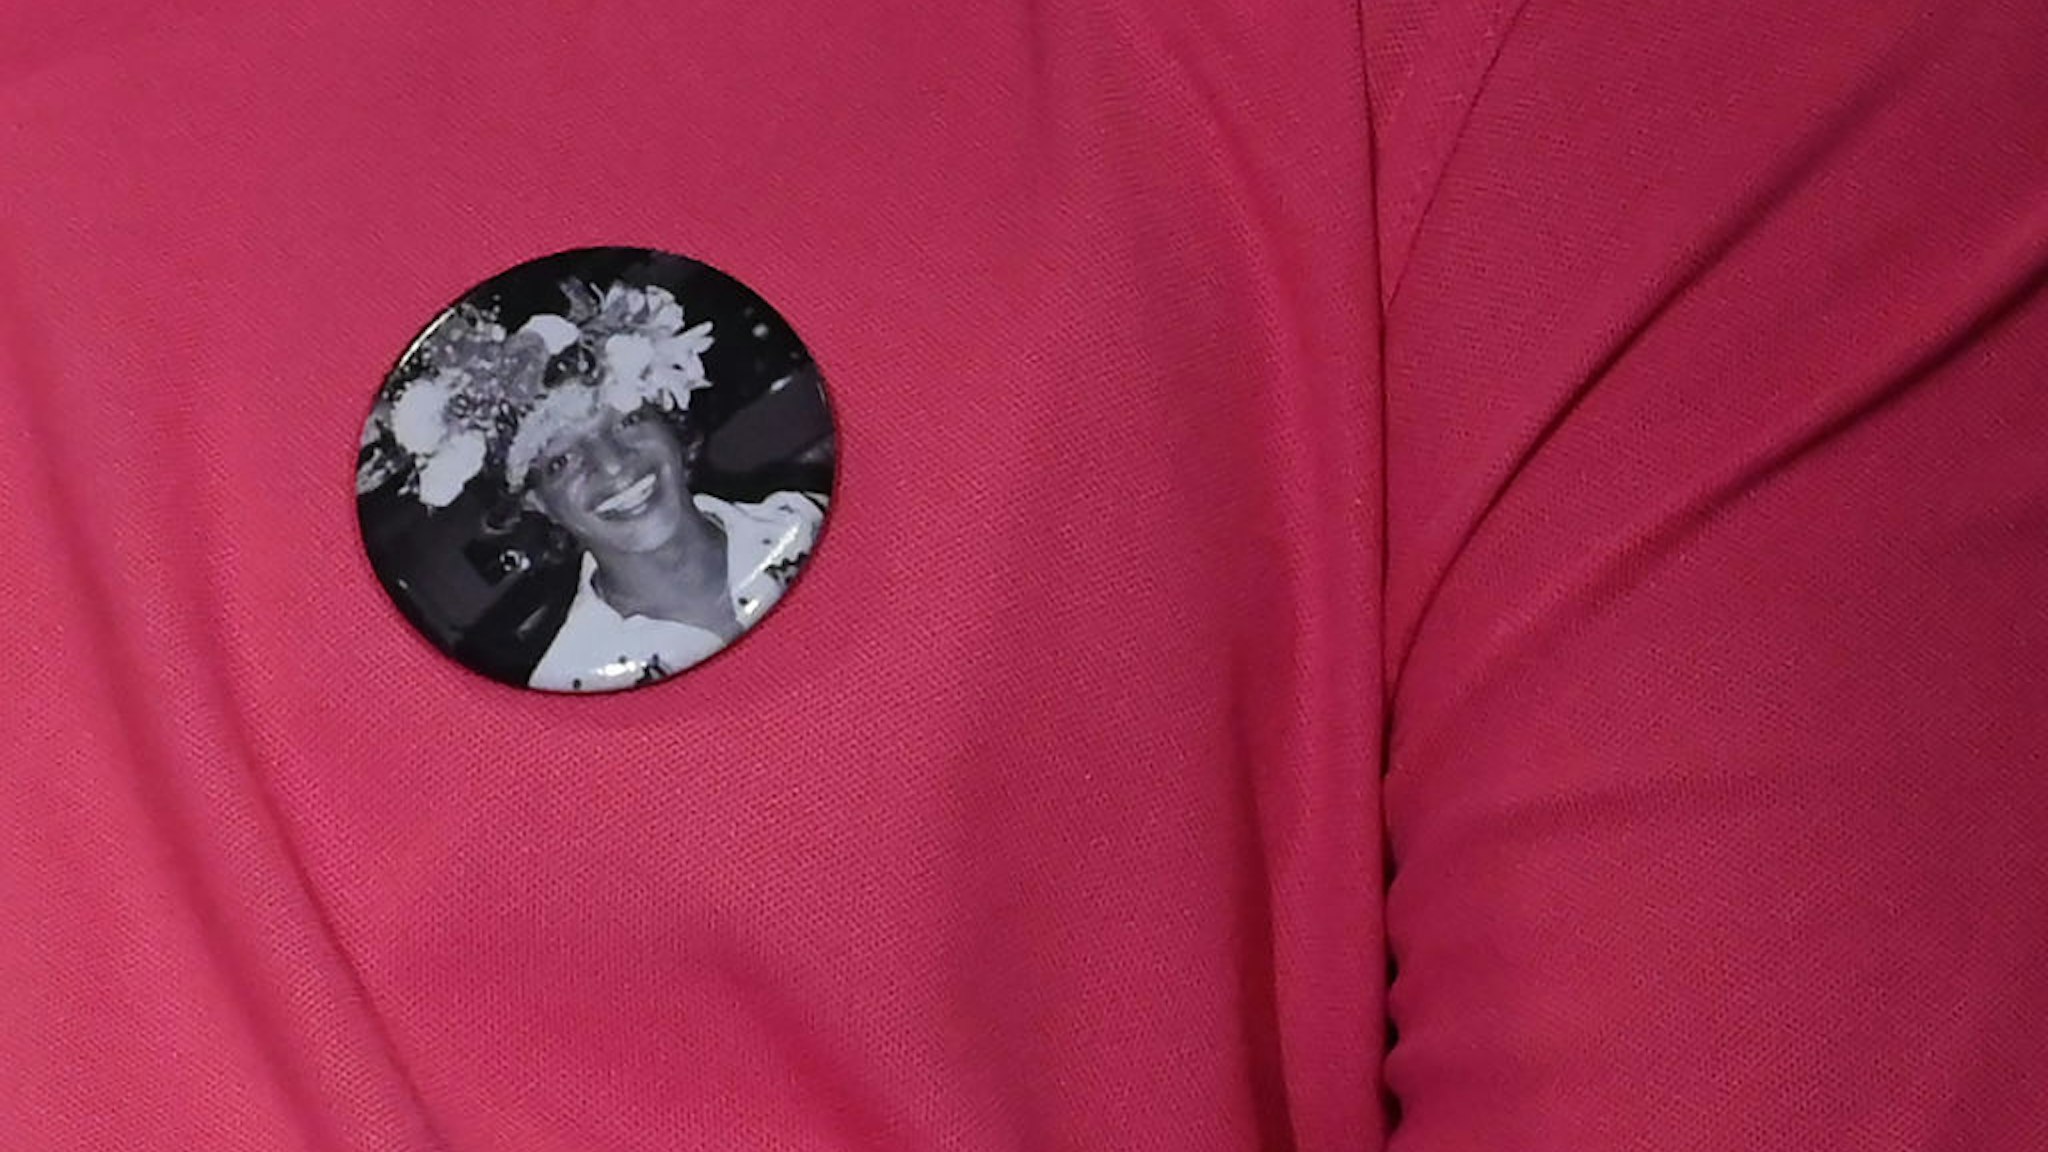 A man wears a button with a picture of transgender activist Marsha P. Johnson during an event at the The Lesbian, Gay, Bisexual &amp; Transgender Community Center in New York on May 30, 2019. - Mayor Bill de Blasio announced the next She Built NYC monument that will honor pioneering transgender activists Marsha P. Johnson and Sylvia Rivera, key leaders in the Stonewall Uprising that sparked the gay liberation movement and the modern fight for LGBTQ rights in the US.